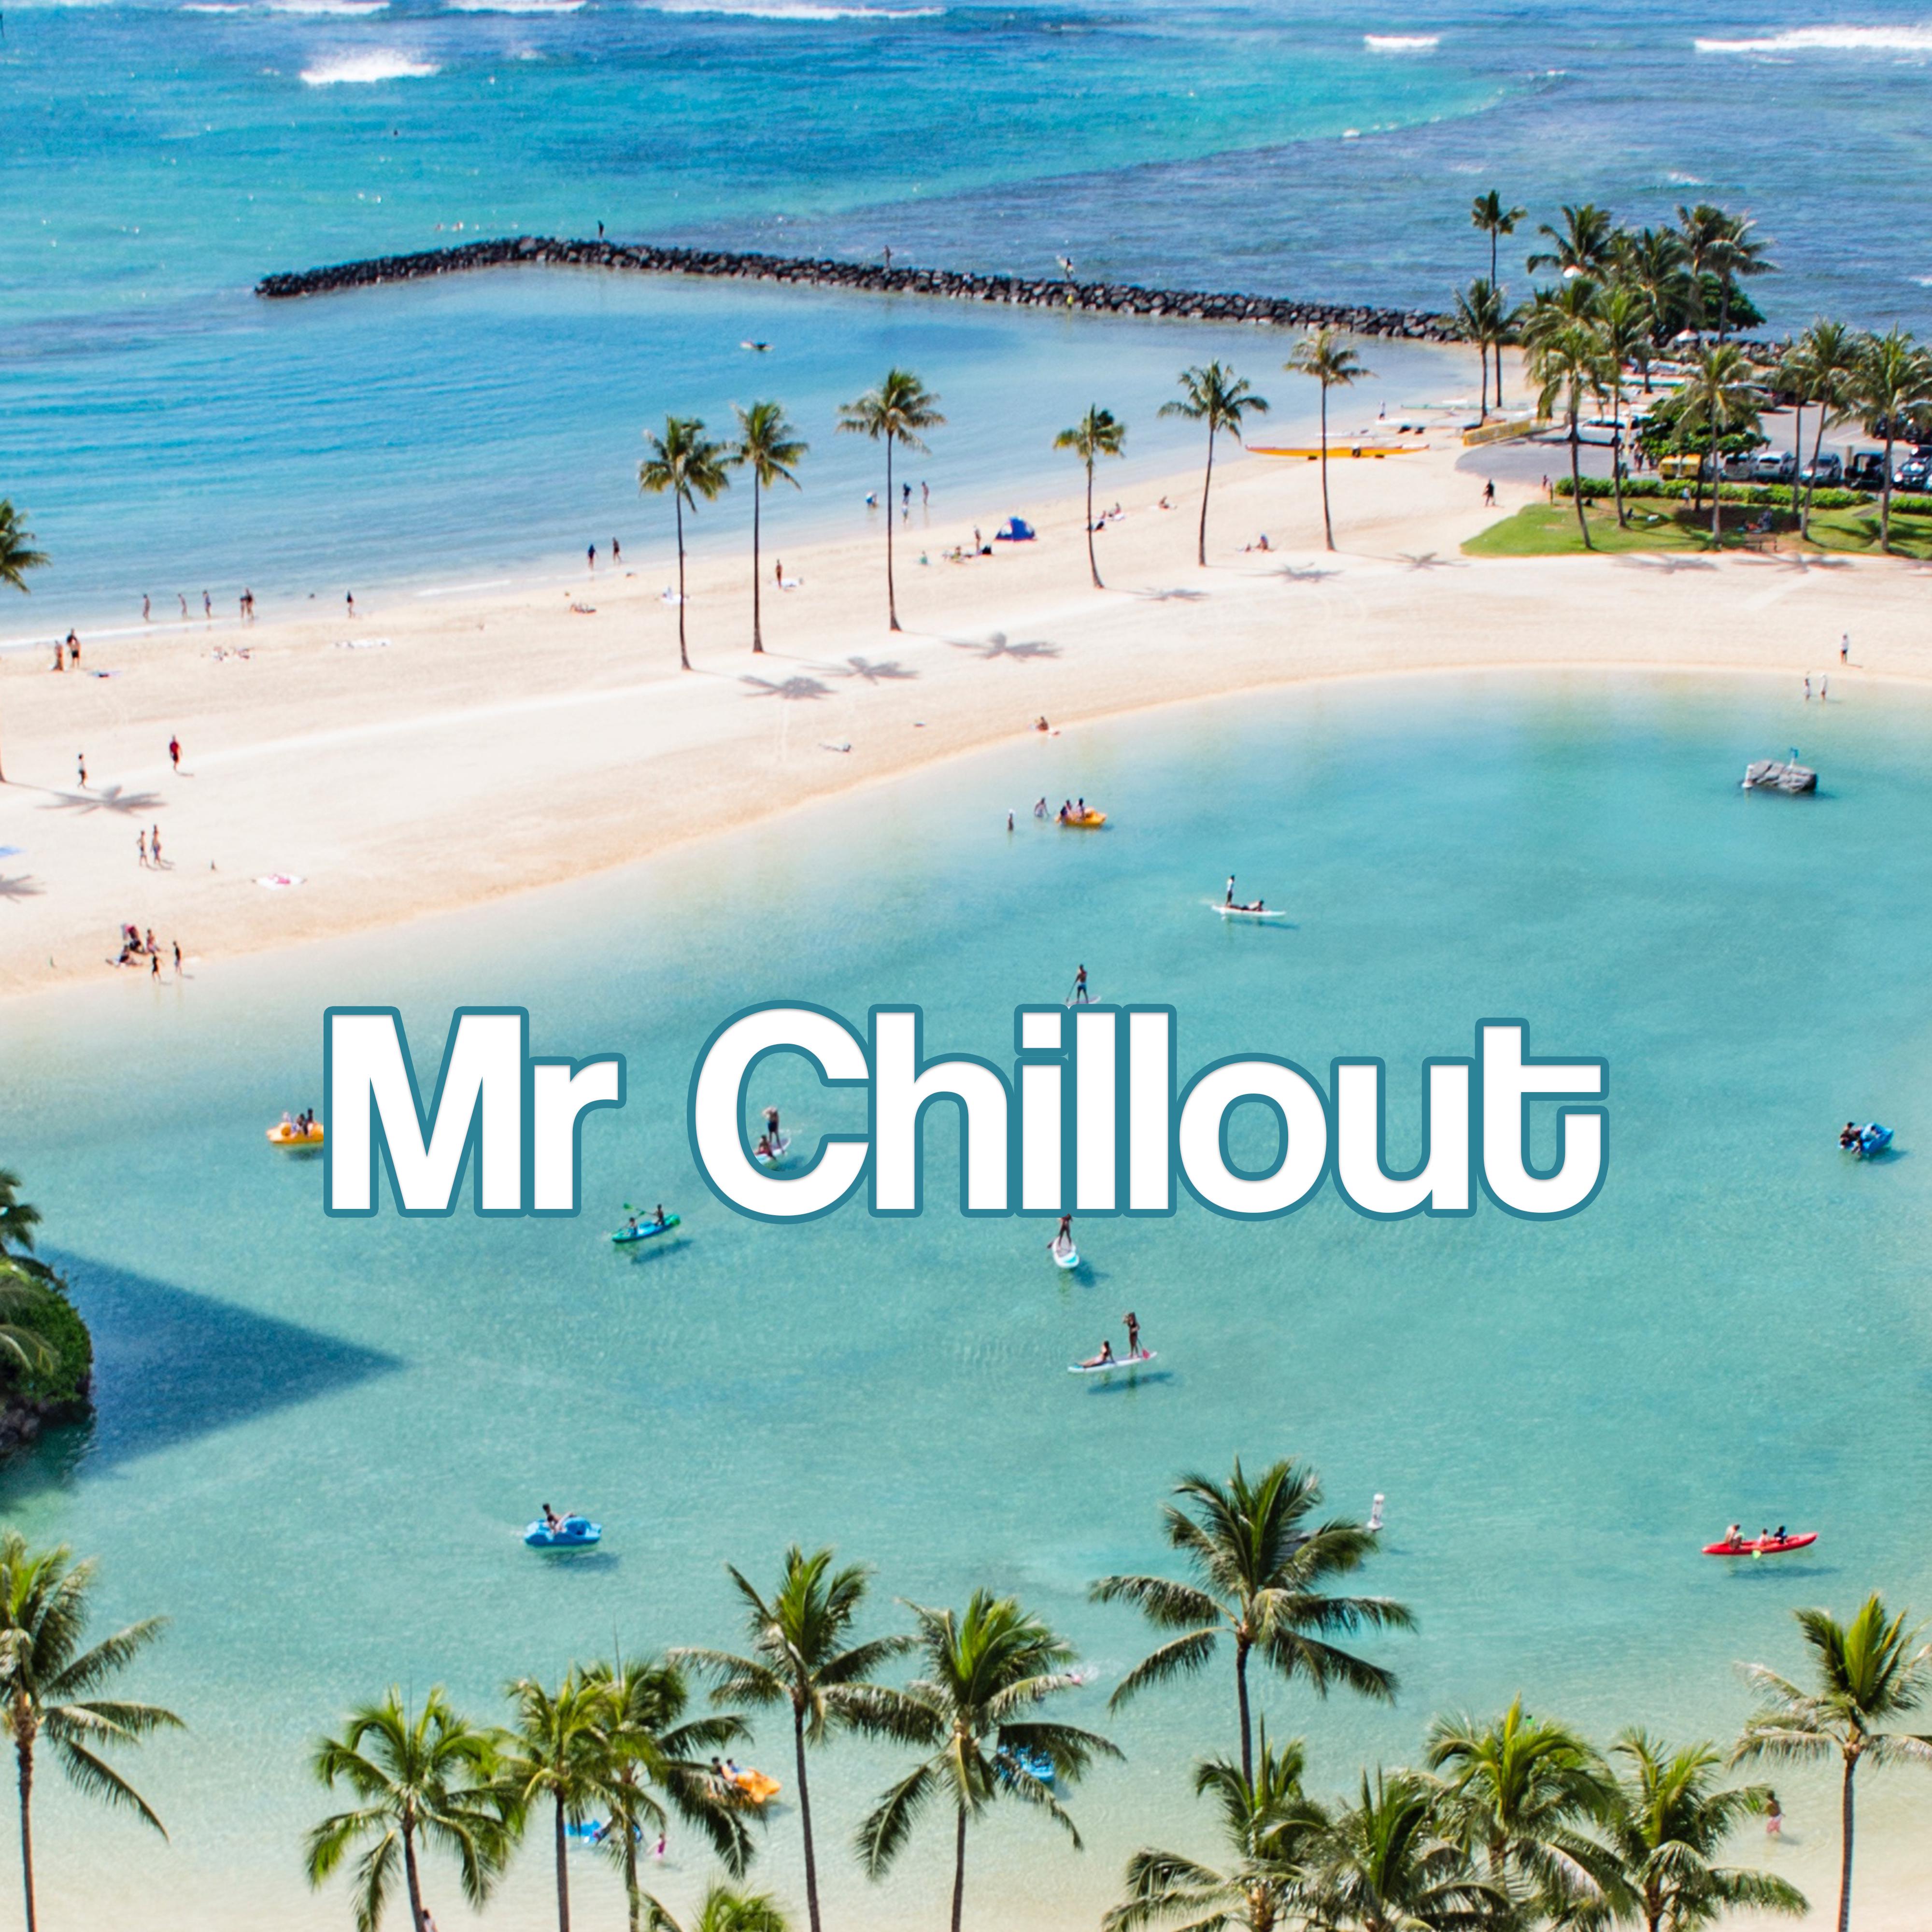 Mr Chillout – Summer Lounge 2017, **** Chillout Music, Dance Party, Beach Music